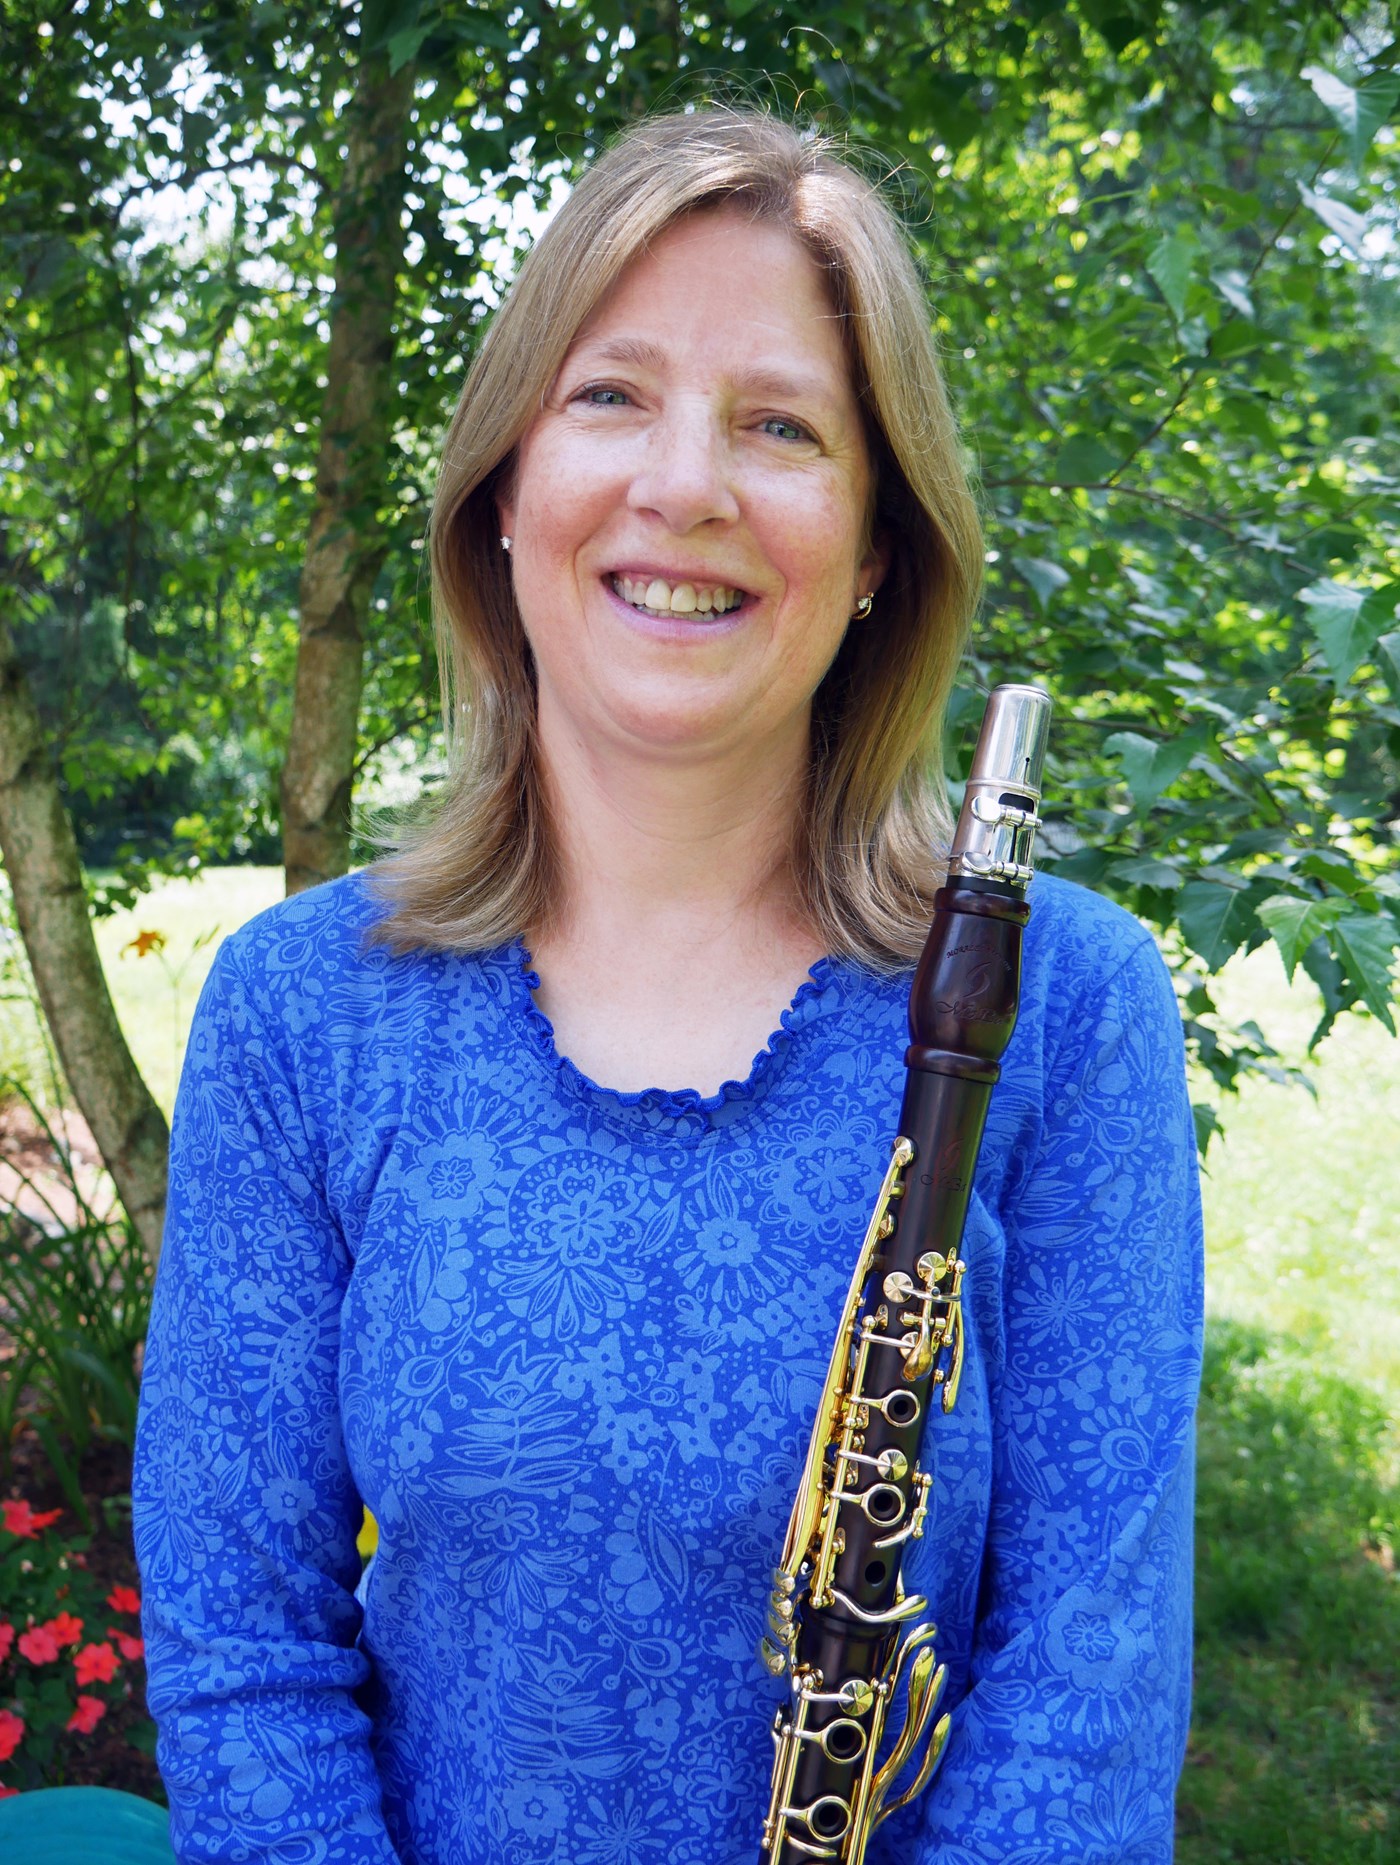 Rebecca Leonard is an Adjunct Faculty member in the Music Department at UMass Lowell.